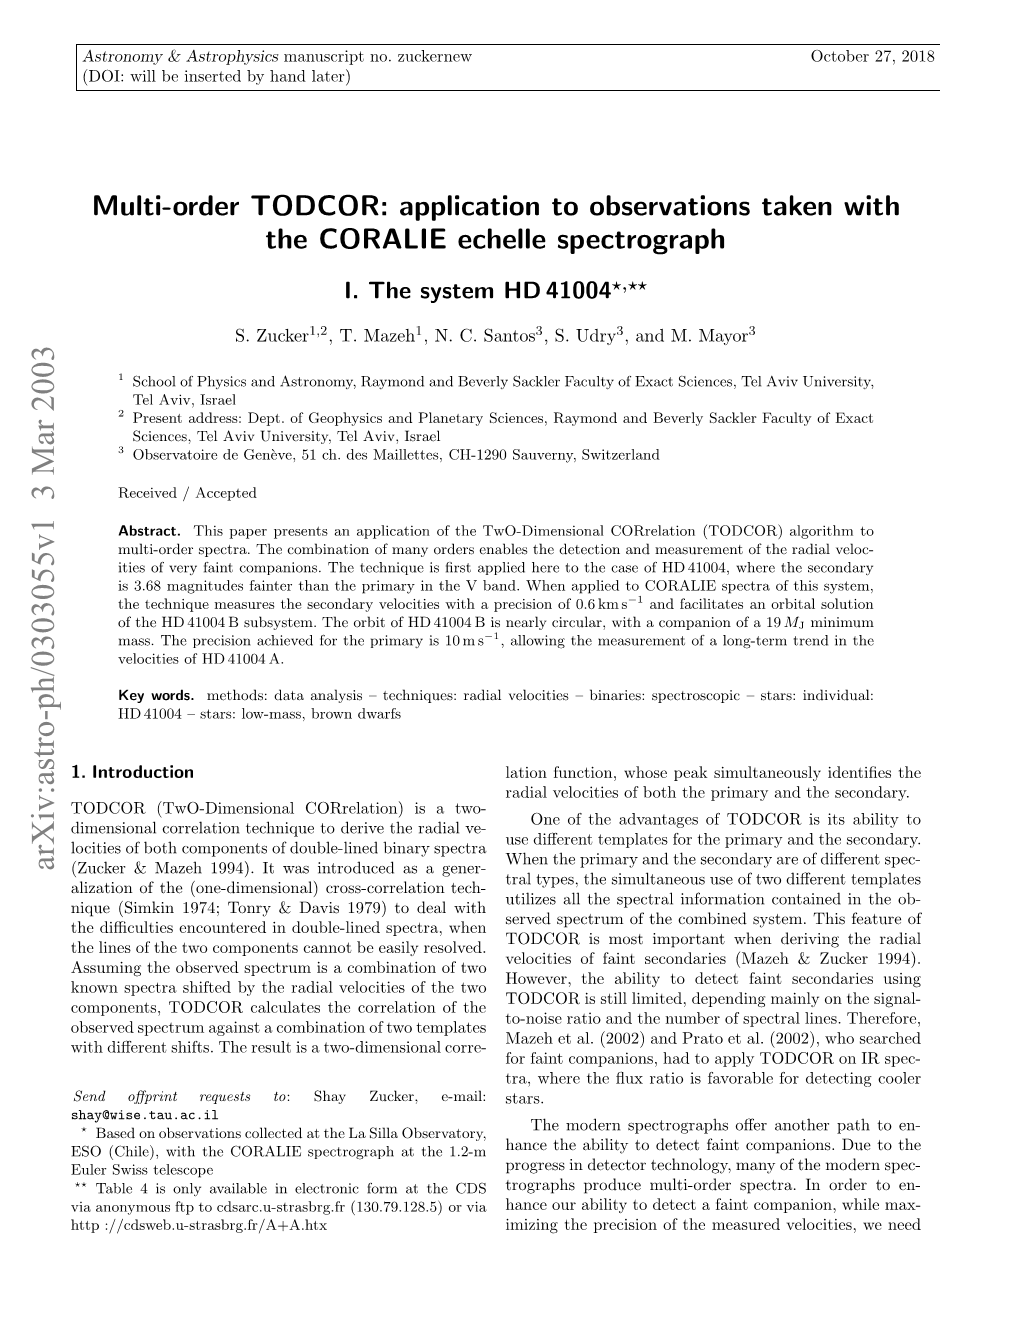 Multi-Order TODCOR: Application to Observations Taken with The